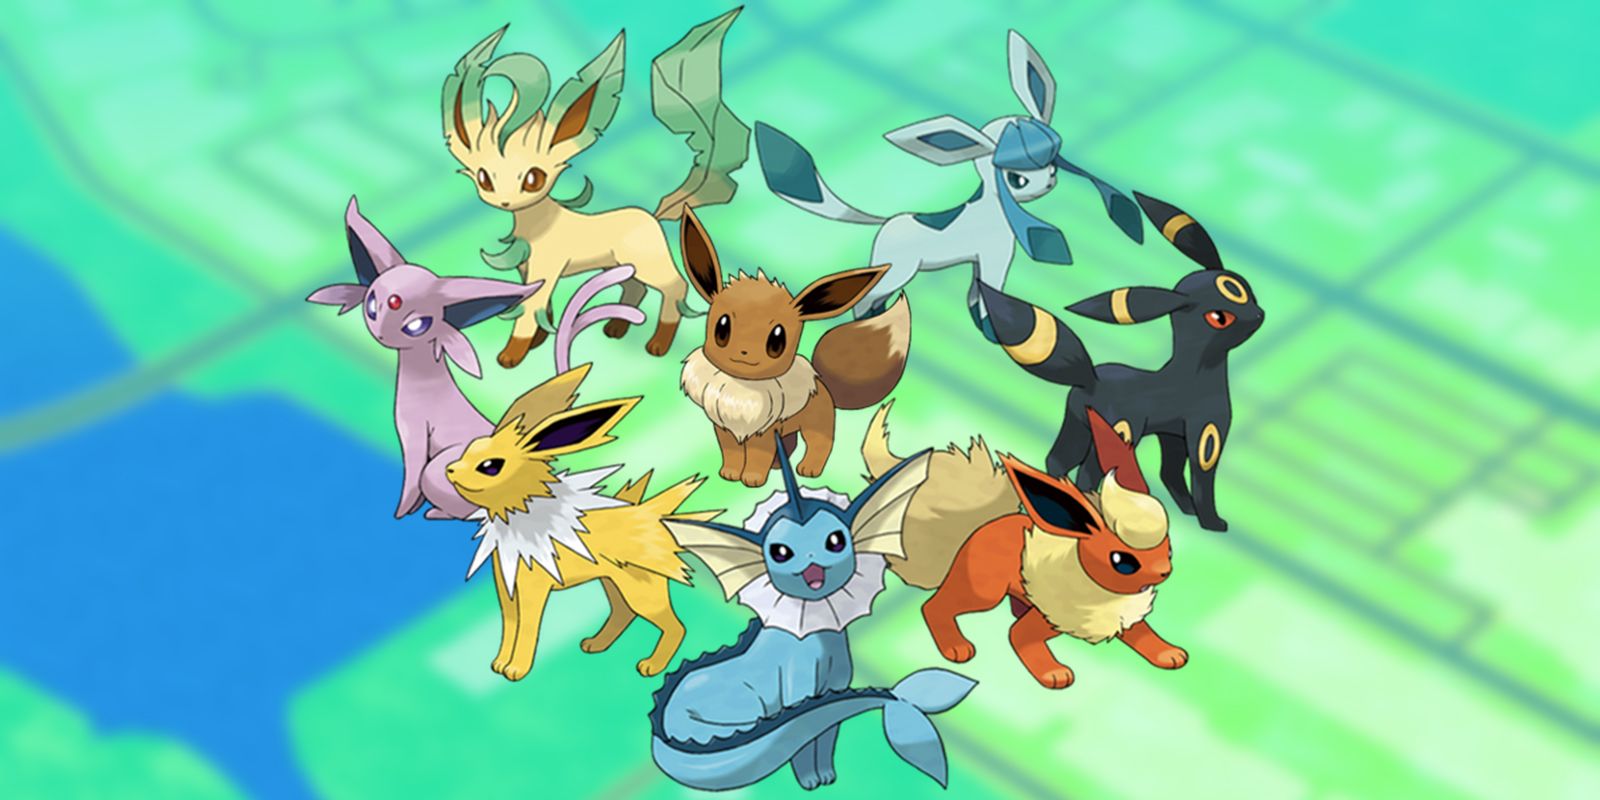 How to Get Umbreon and the Other Eeveelutions in 'Pokémon GO